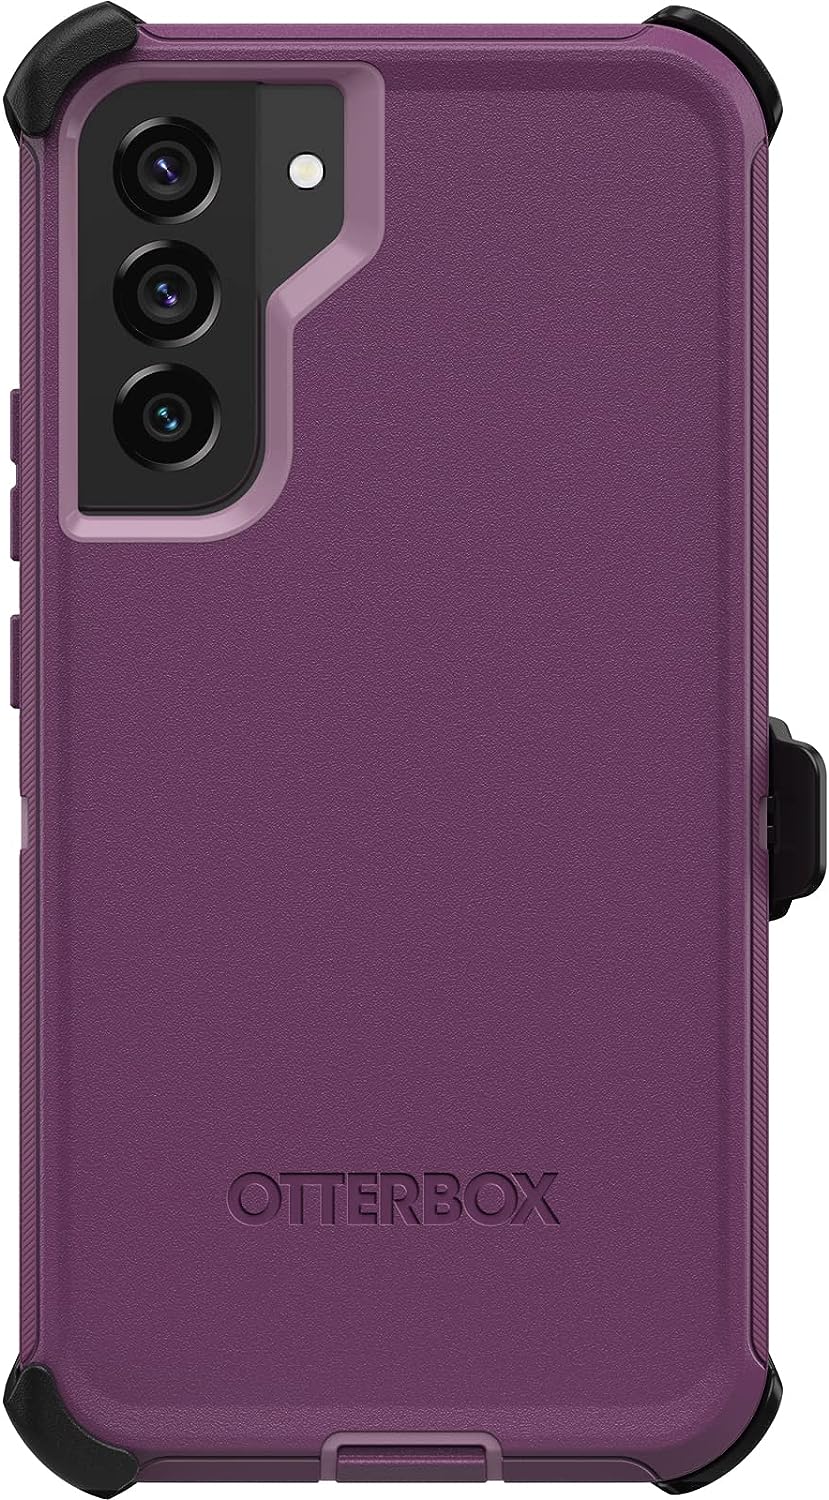 Galaxy OtterBox DEFENDER SERIES Case &amp; Holster for Galaxy S22+ Plus - Happy Purple (New)